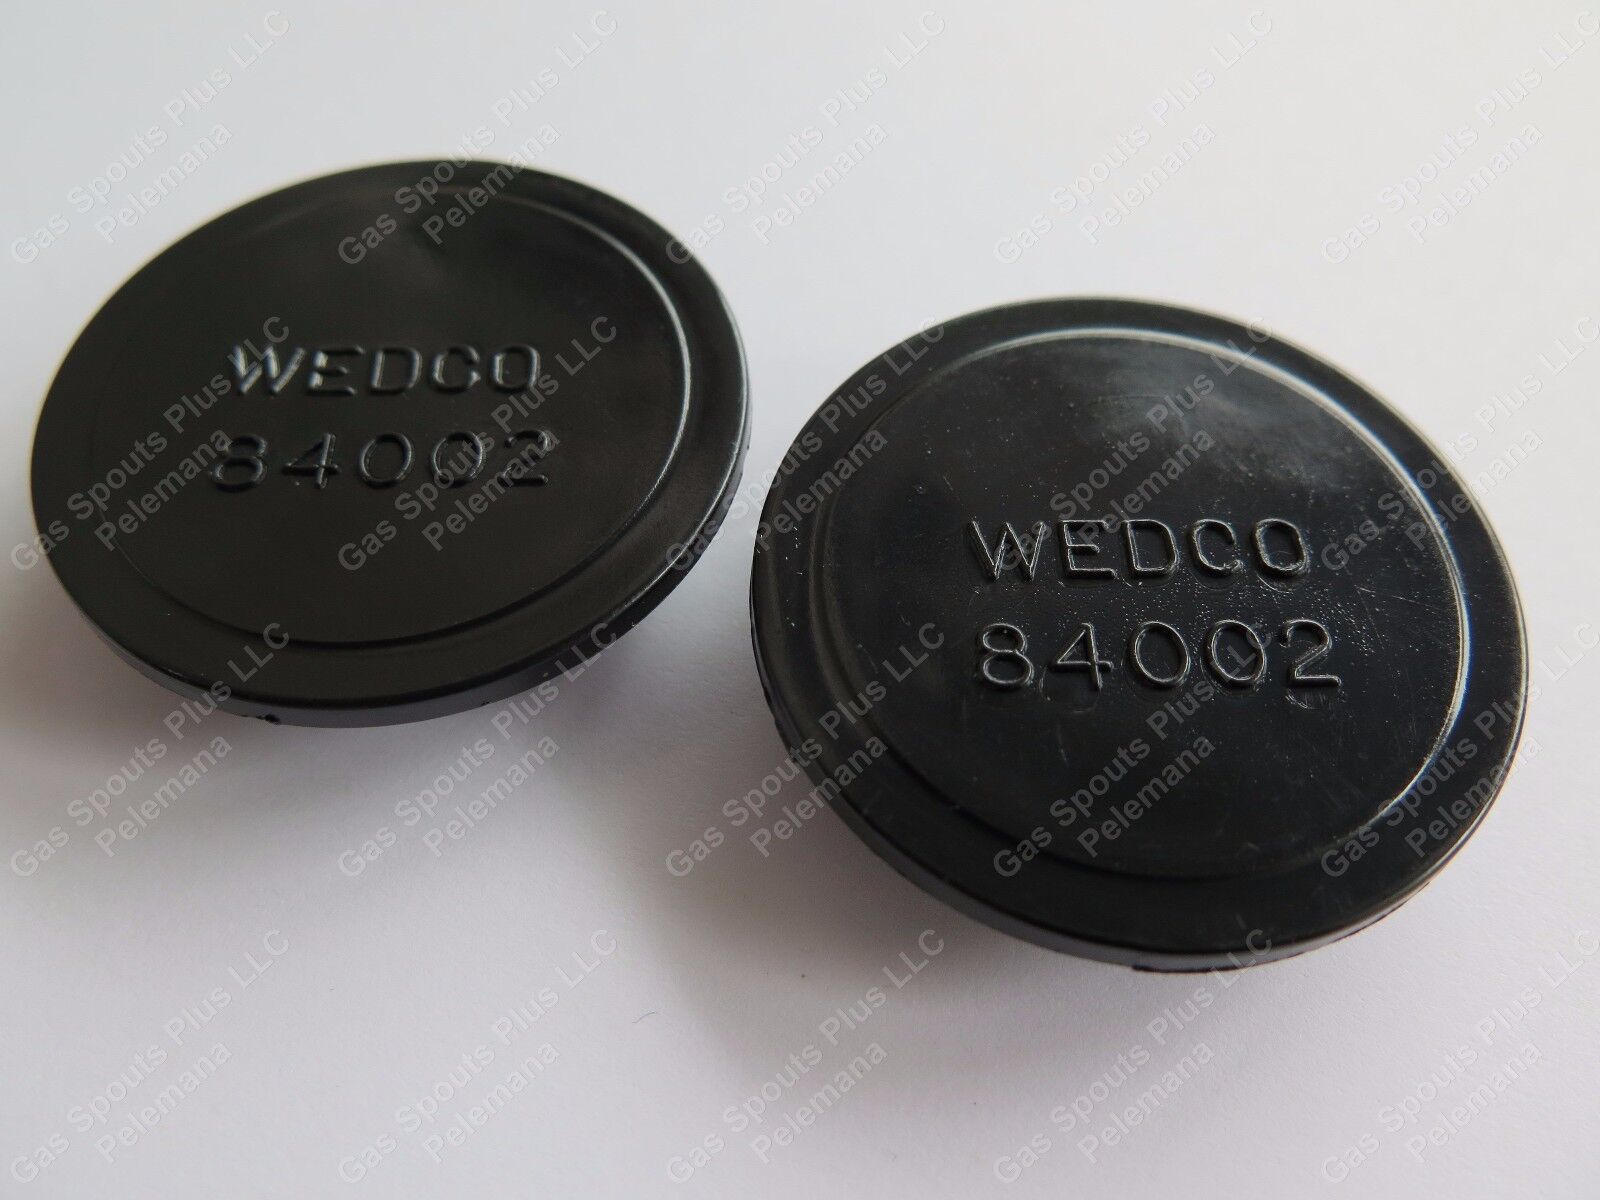 2-Pack Wedco Black Stopper Seal Discs 84002 Replacement Gas Can Parts Briggs NEW Wedco, Briggs & Stratton 80436 - фотография #2